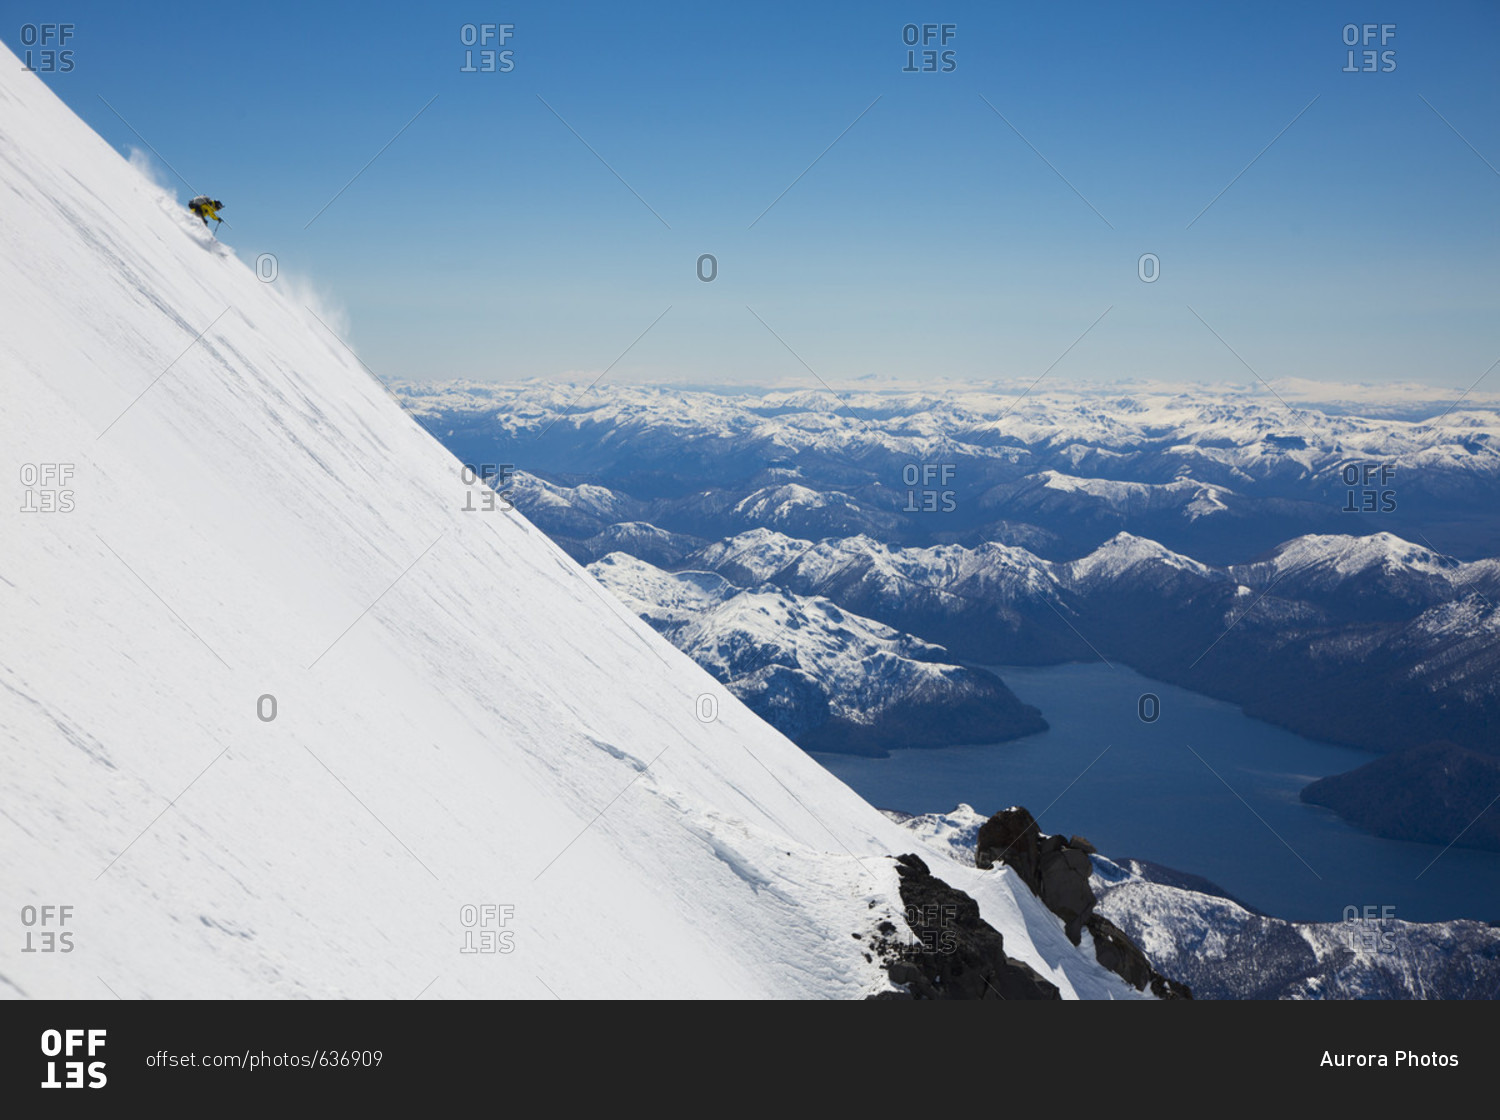 Adventurous skier skiing down steep slope with mountain range in background, Lakes District, Chile